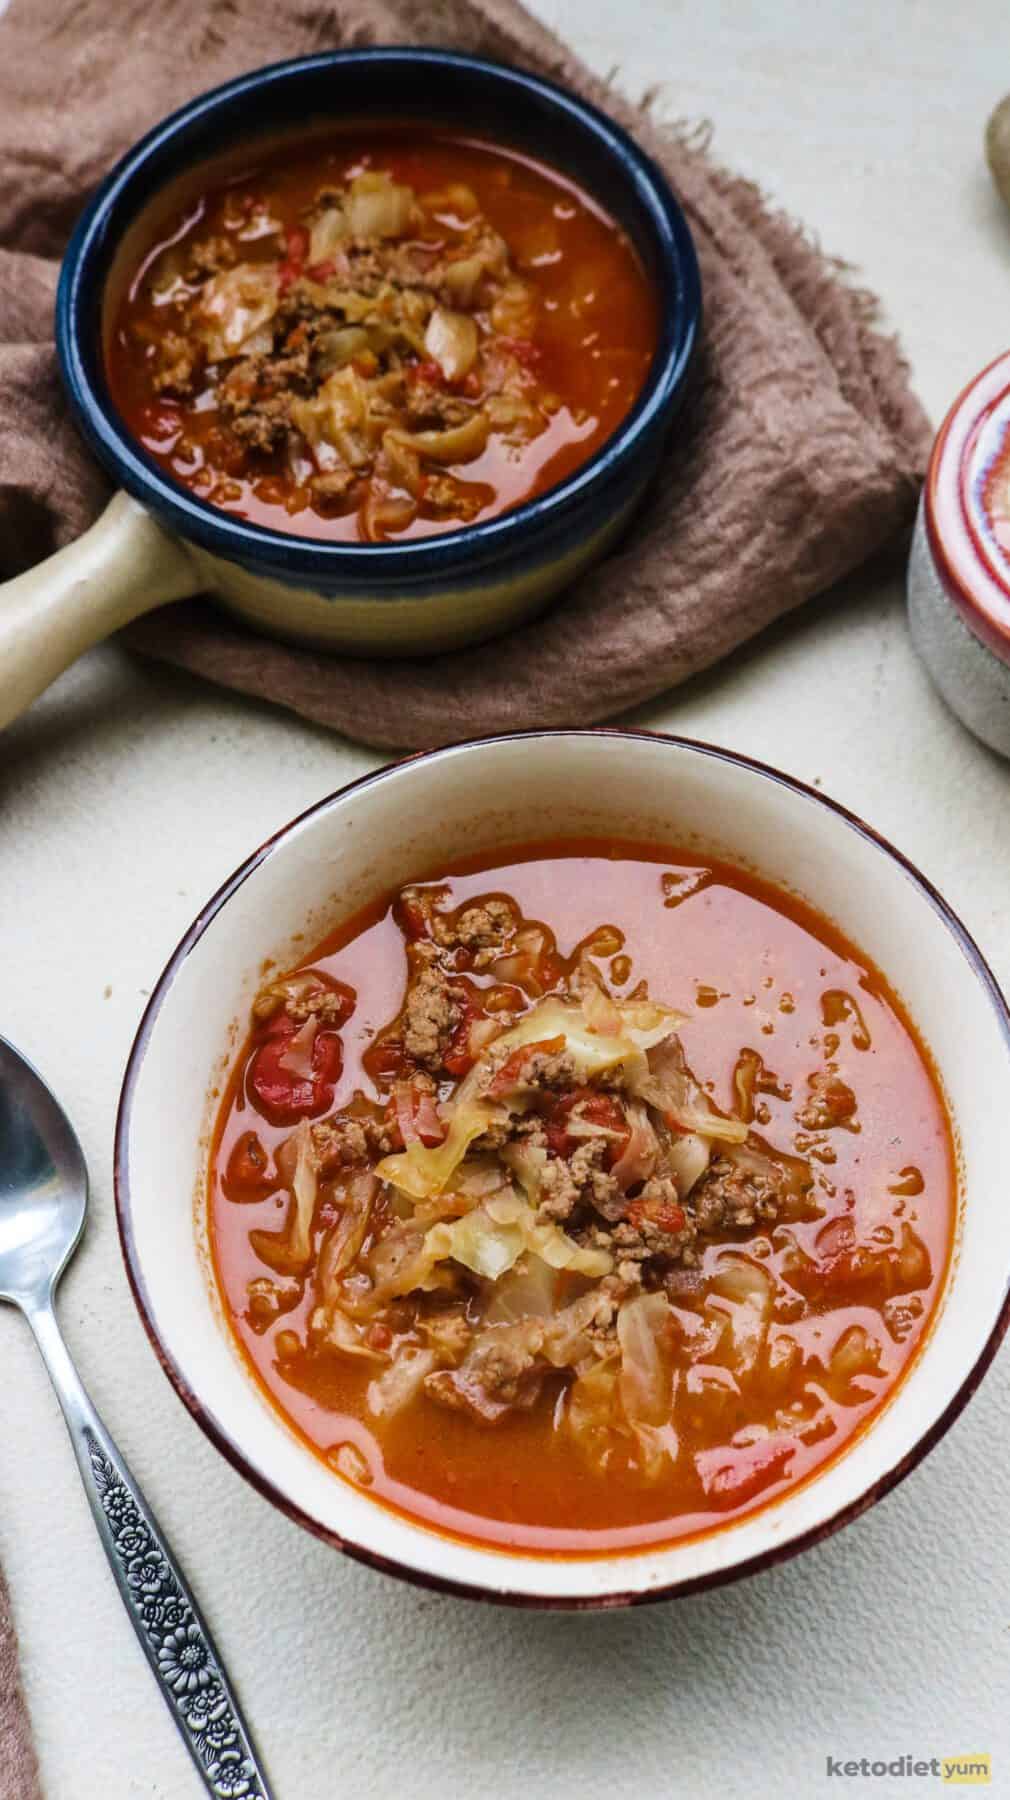 Bowl of tomato cabbage soup on a table with a spoon next to it and a pot of tomato cabbage soup on a kitchen towel in the background